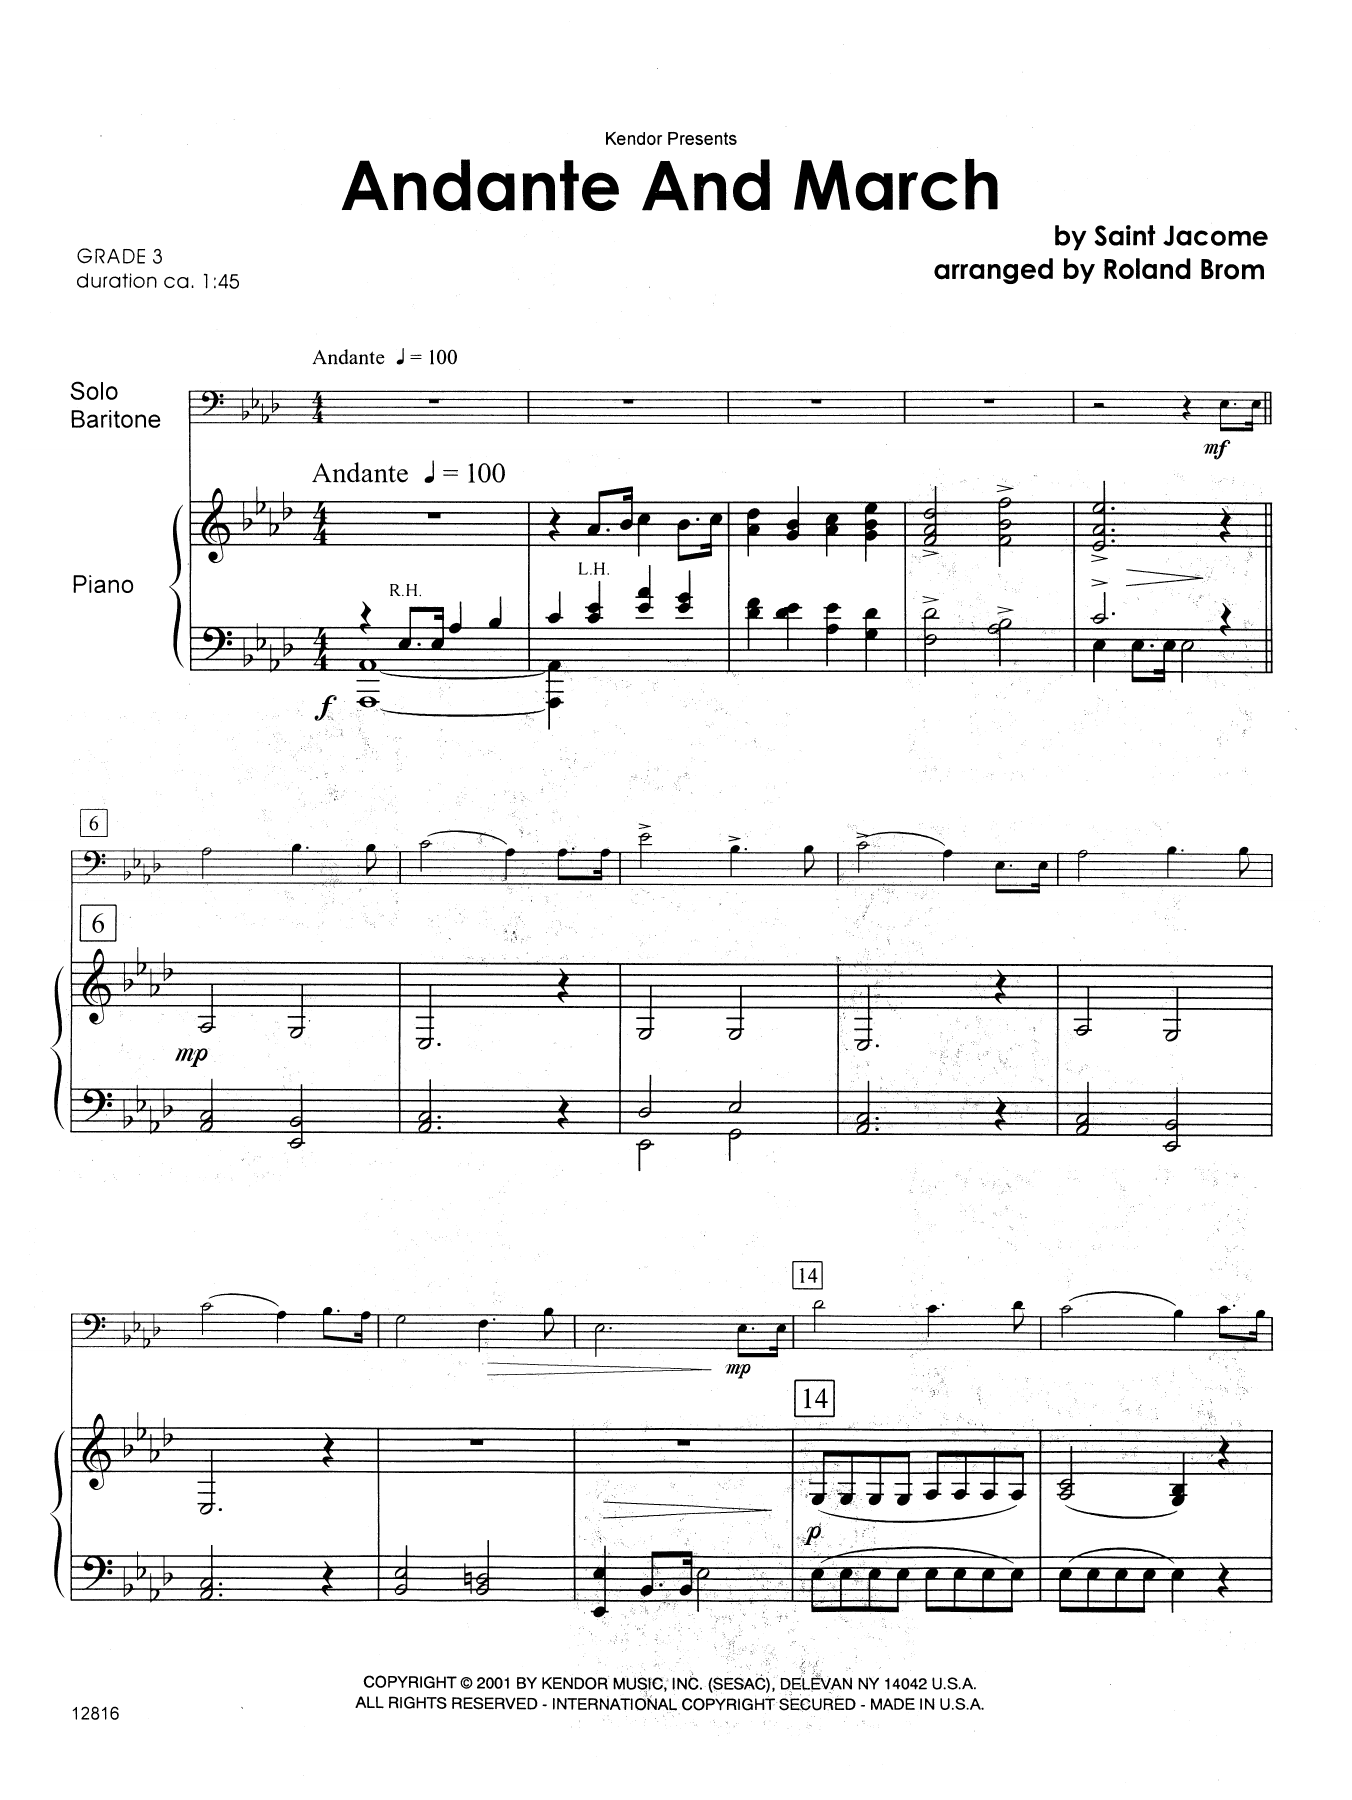 Download Brom Andante And March - Piano Sheet Music